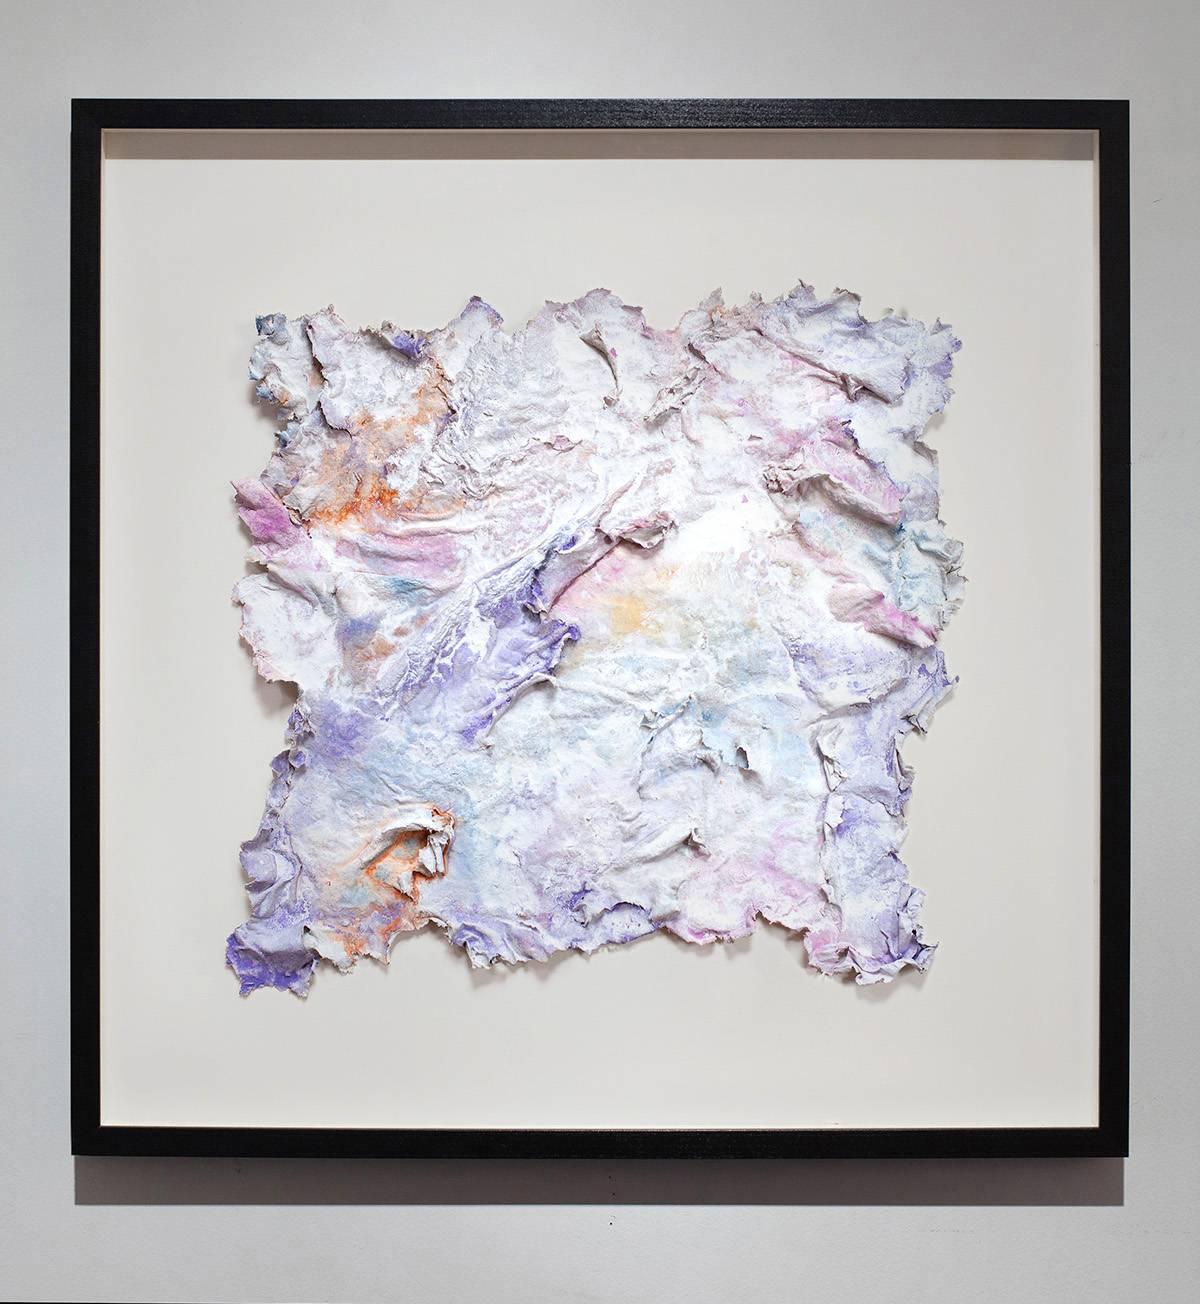 "Charta: Niveus" (Paper: White in Latin) belongs to the series of works on paper that Ruggero Vanni has created since 2009. It all begins by casting several layers of handmade paper one over another to create a wavy and tempestuous